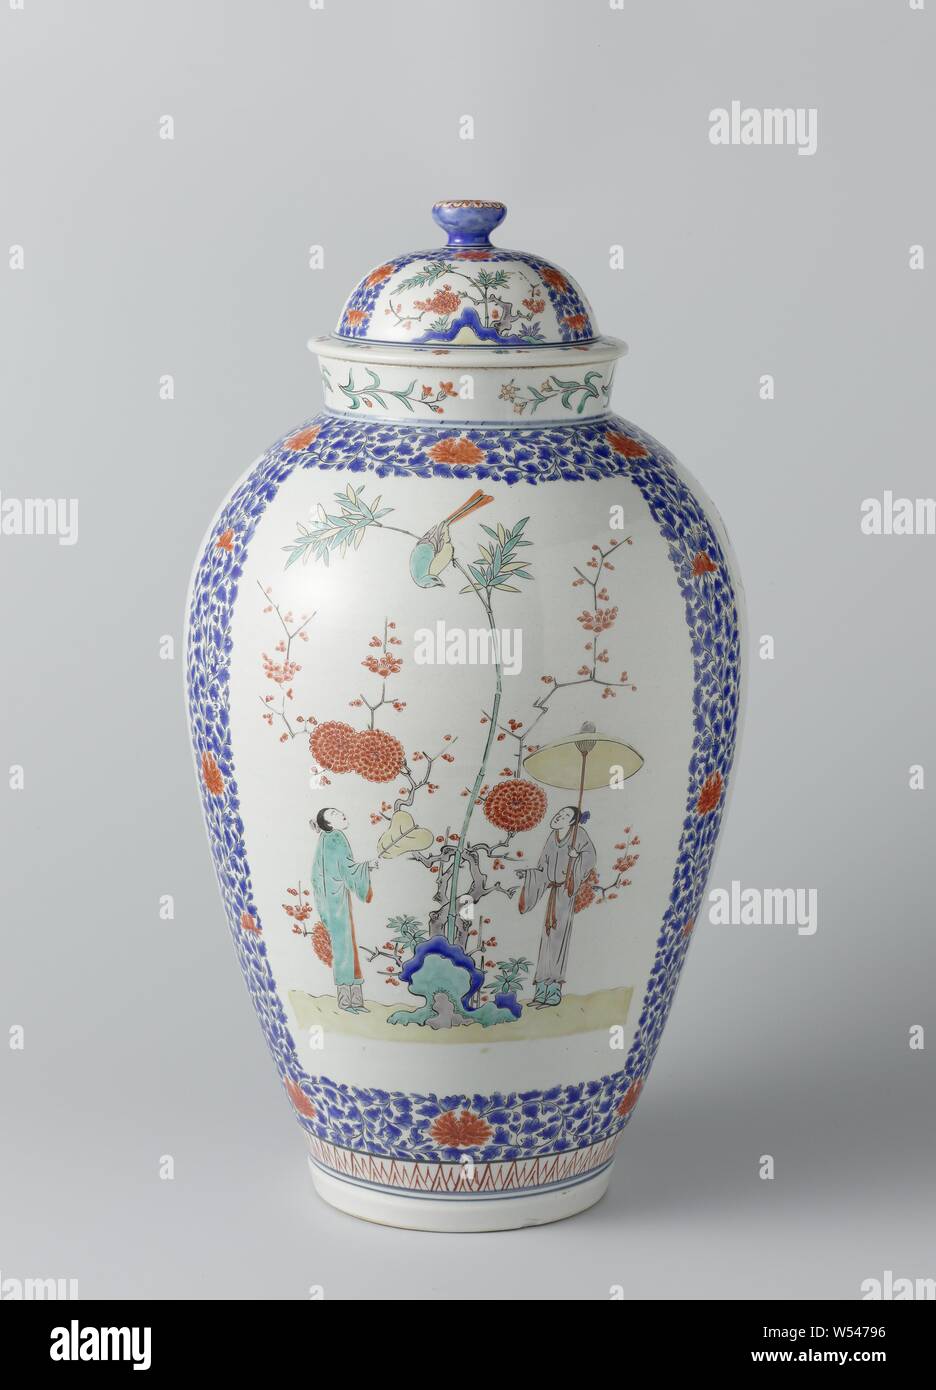 Lidded jar, Ovoid covered jar with figures, plants and birds, High, egg-shaped pot of porcelain, painted on the glaze in blue, red, green, yellow, eggplant and black. The belly is divided into three fields, always filled with two people with a fan and a parasol with flowering plants (bamboo, prunus) and a rock. The fields are enclosed by flower vines. Flower branches on the neck. The lid with the same decoration. Arita, Kakiemon style., anonymous, Japan, c. 1670 - c. 1690, Edo-period (1600-1868), porcelain (material), glaze, vitrification, h 53.3 cm d 15.8 cm d 28 cm d 16.2 cm Stock Photo